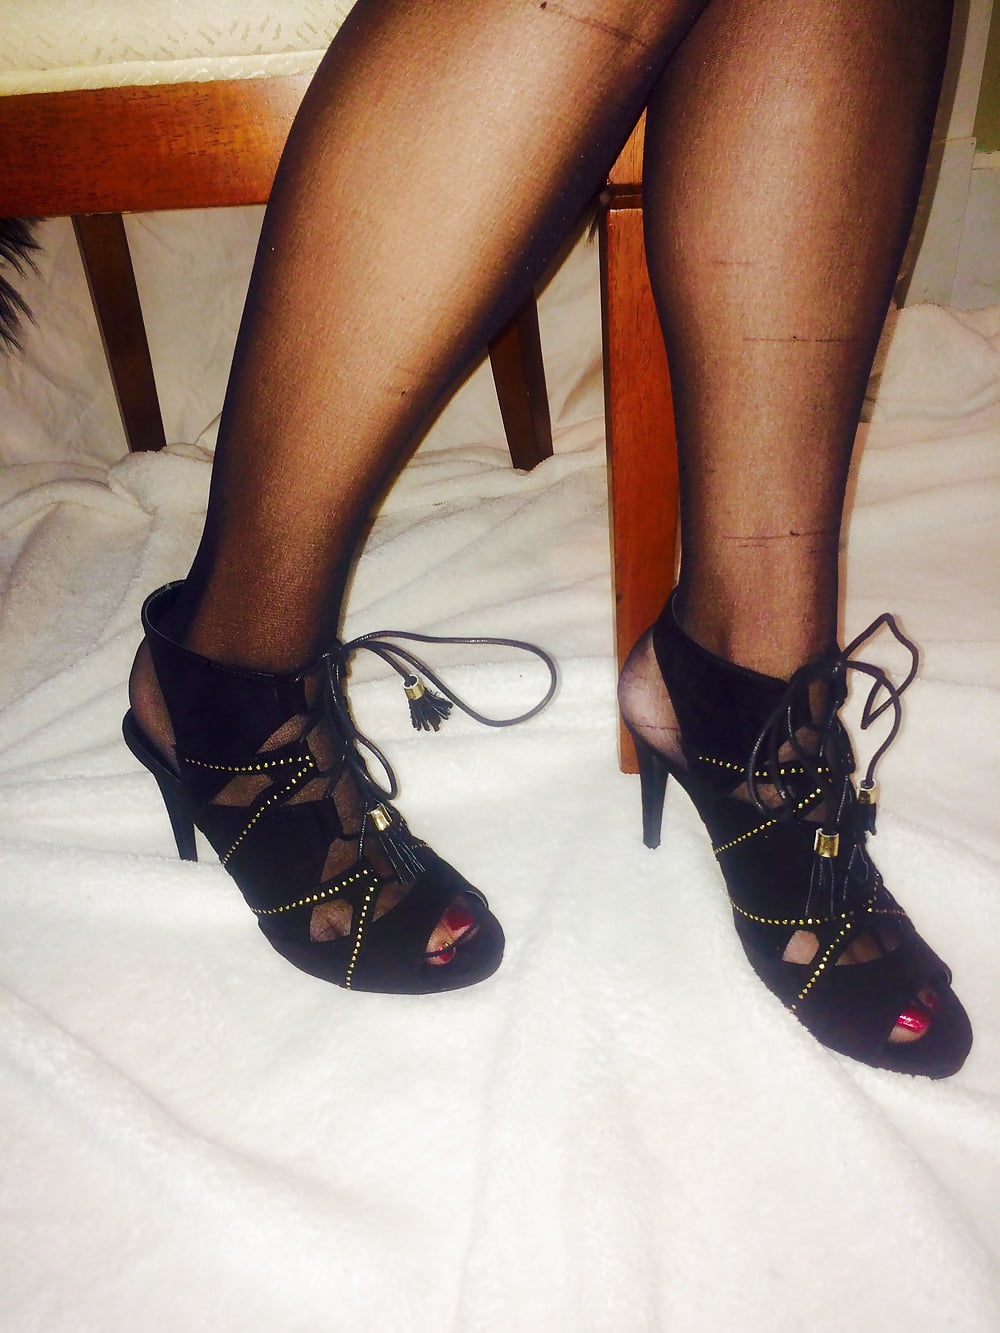 Porn image Wife's feet in nylons and her new heels. Tributes welcome!